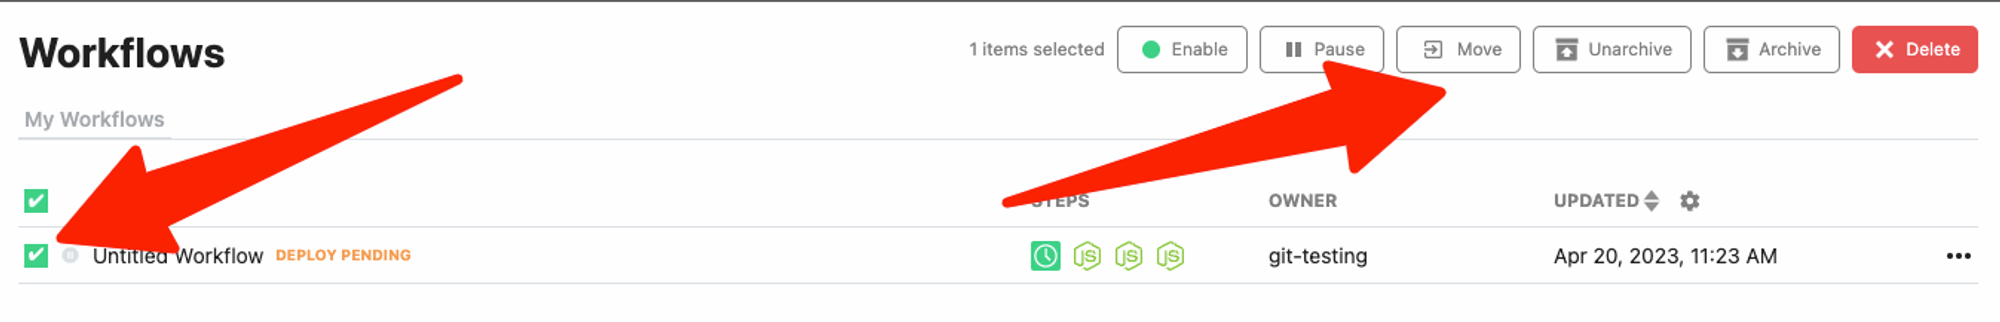 Select your workflows you'd like to transfer to a project, then click the Move button in the top right